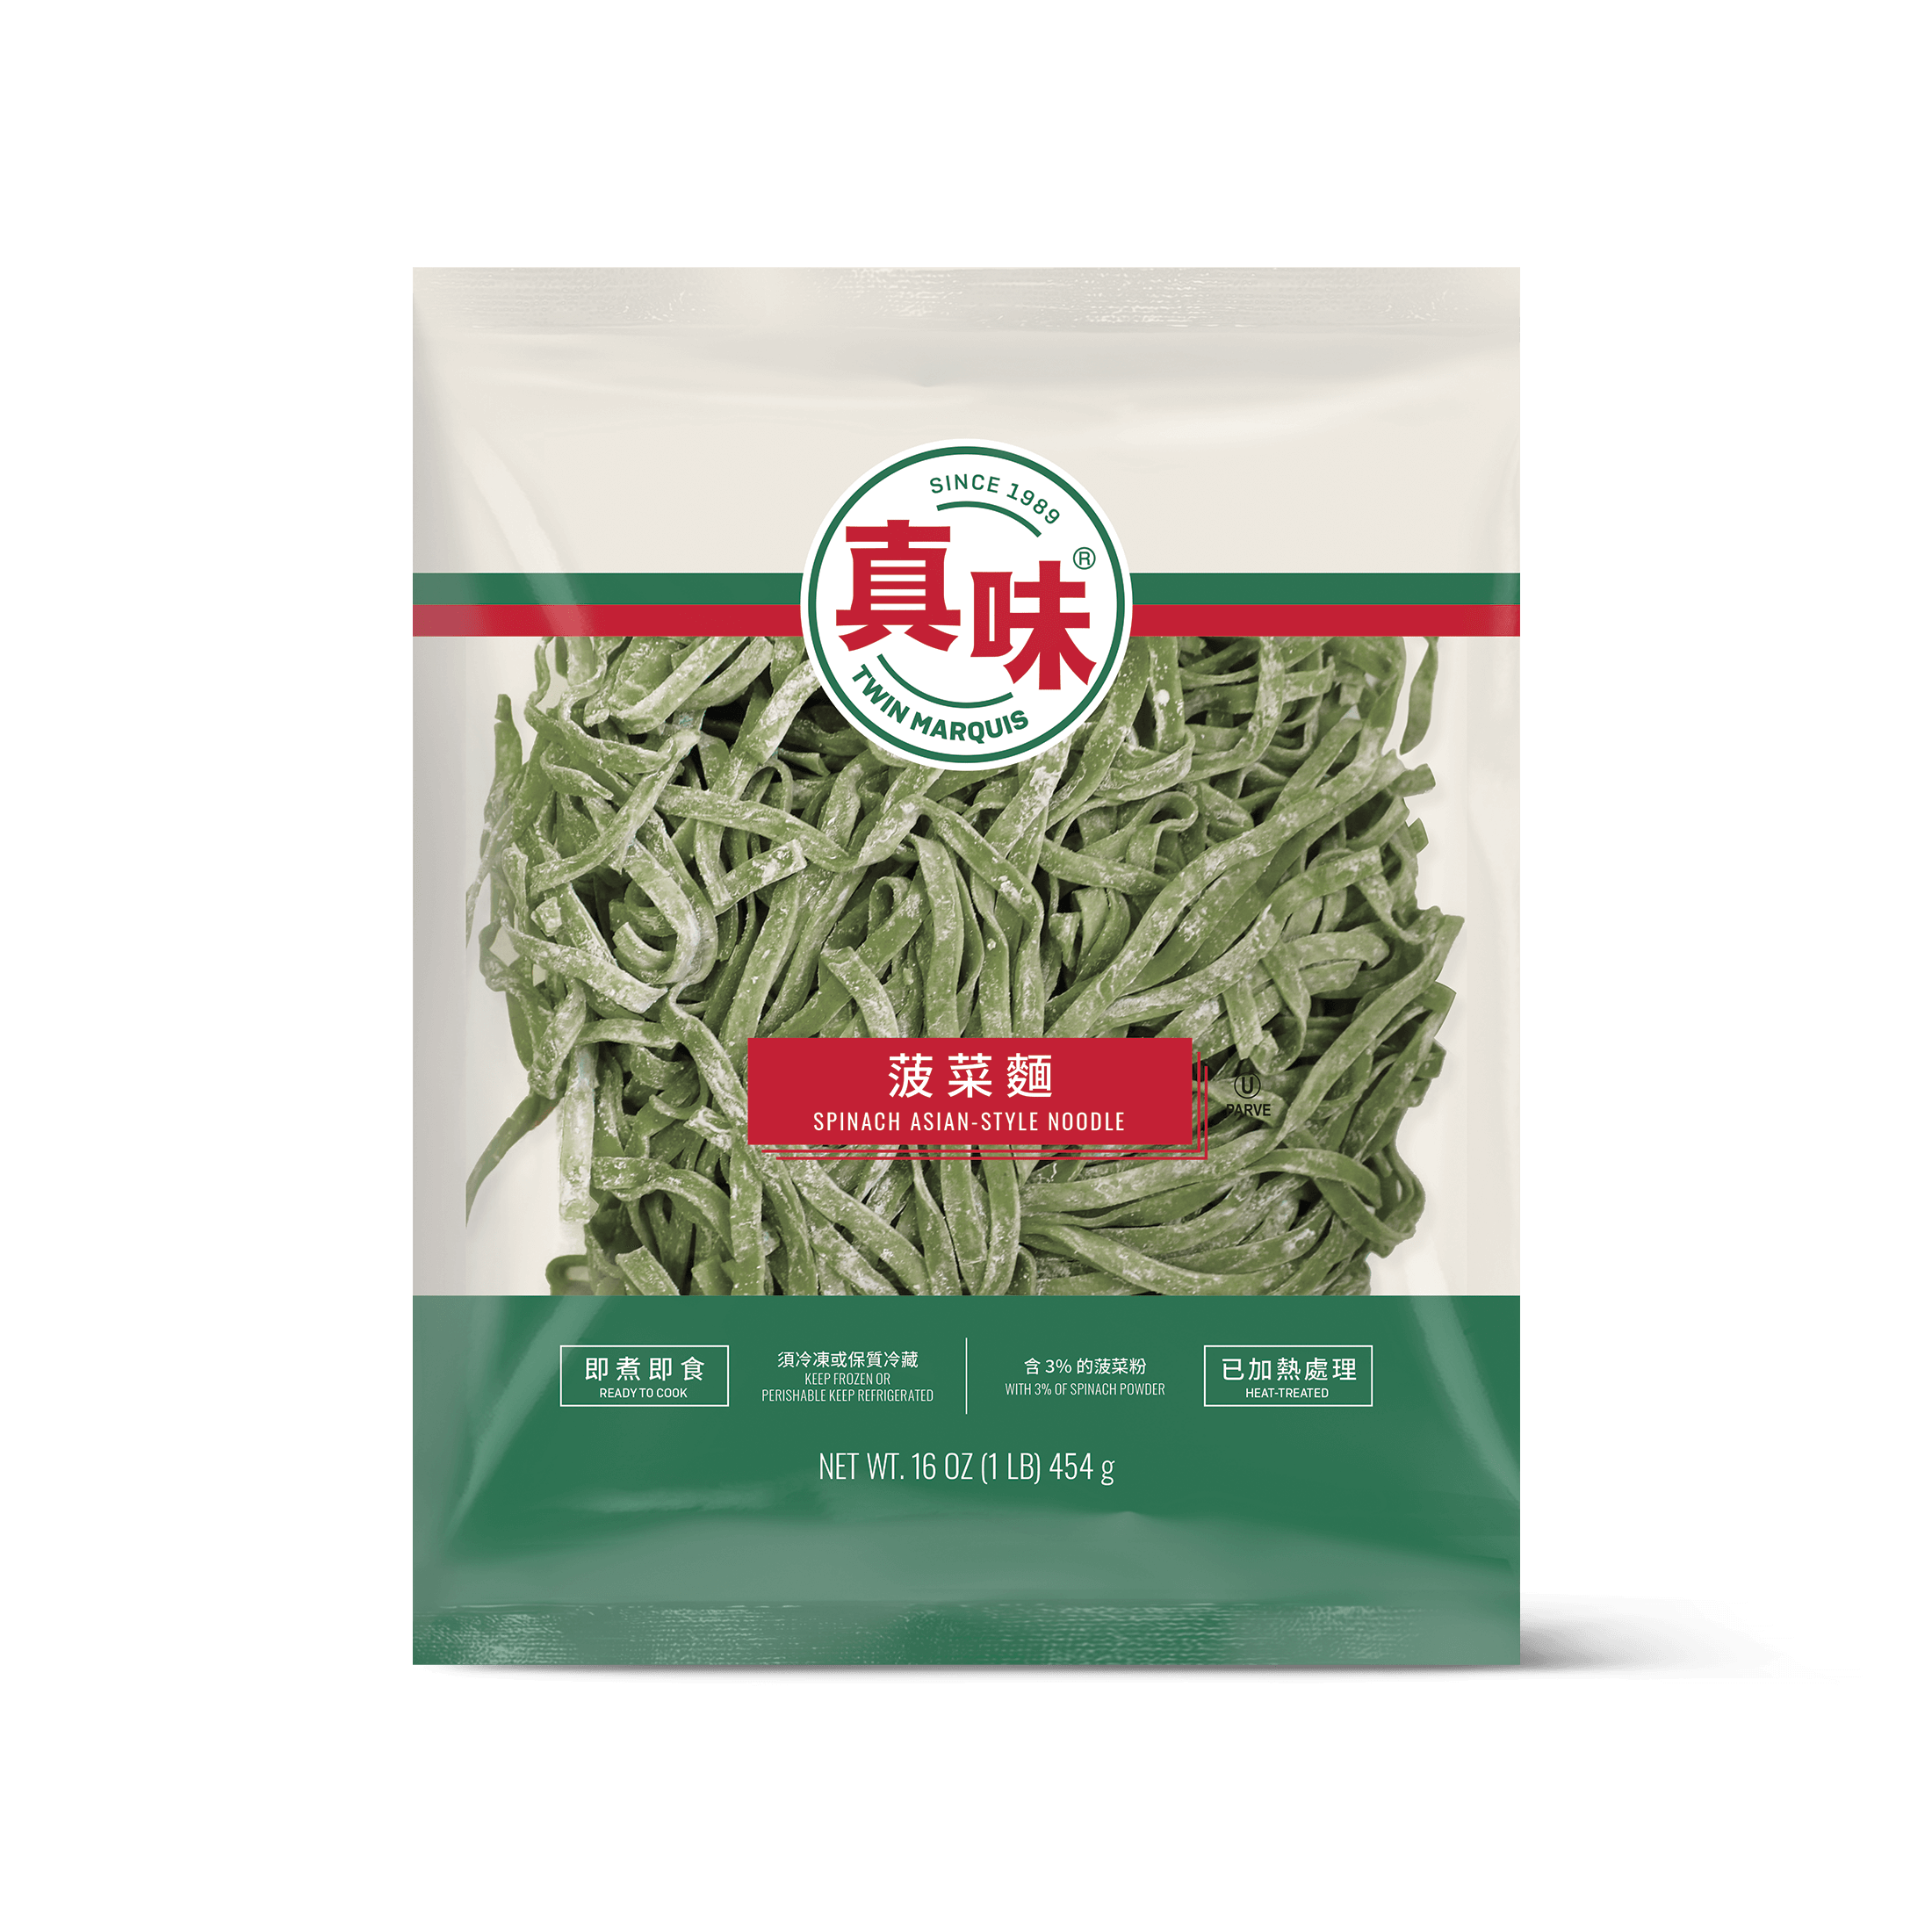 image: Spinach Asian-Style Noodle